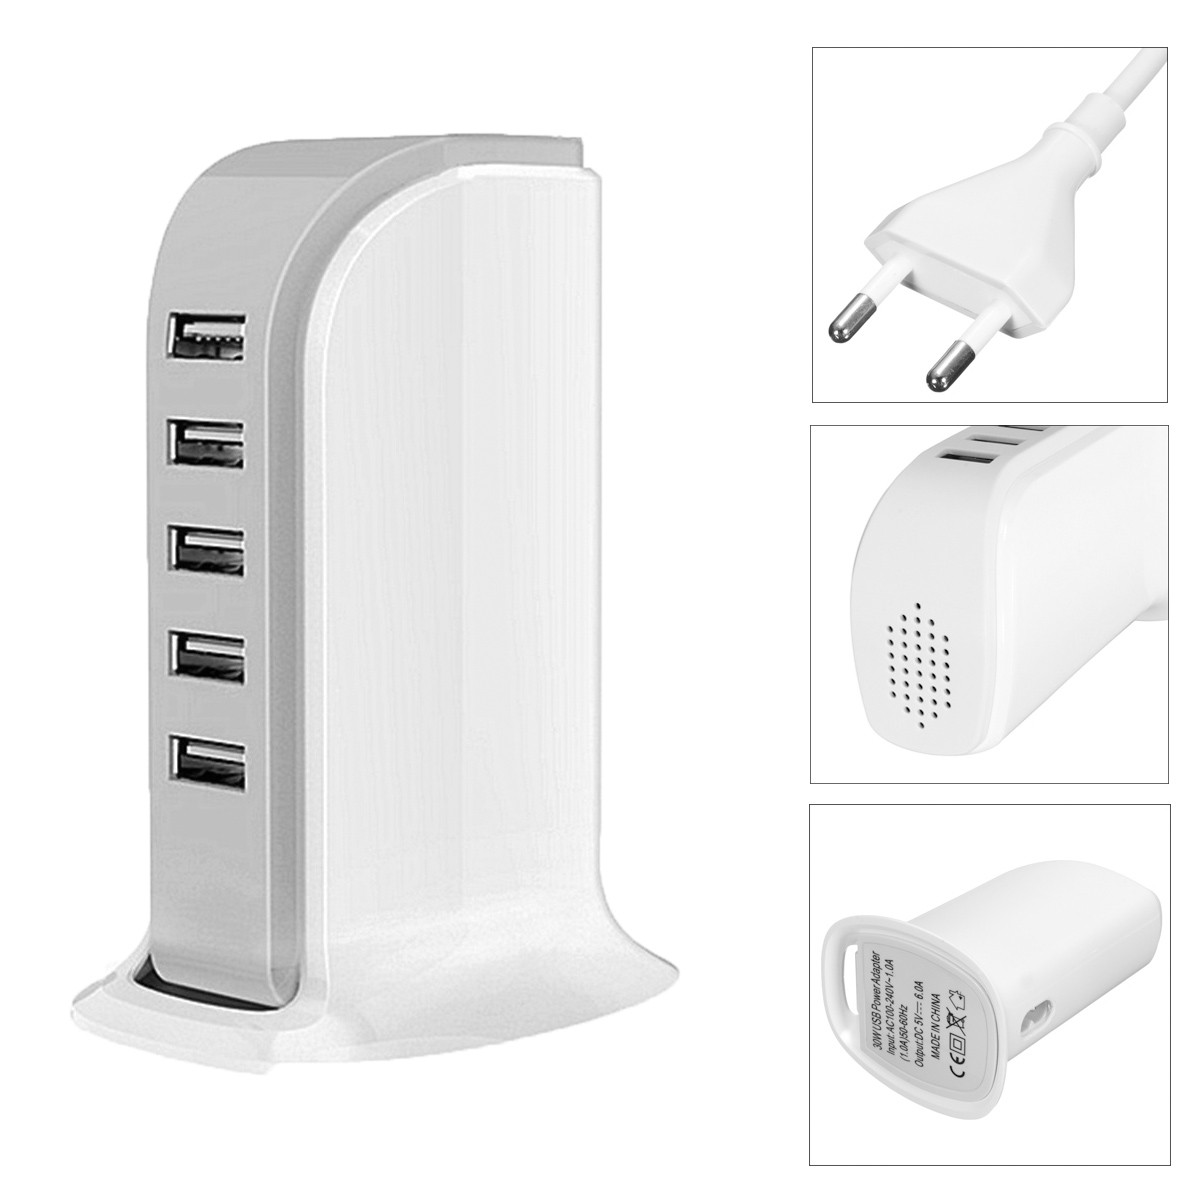 

5 Port USB Adapter 30W 6A Travel Wall Rapid Charger Station Hub Phone Tablet